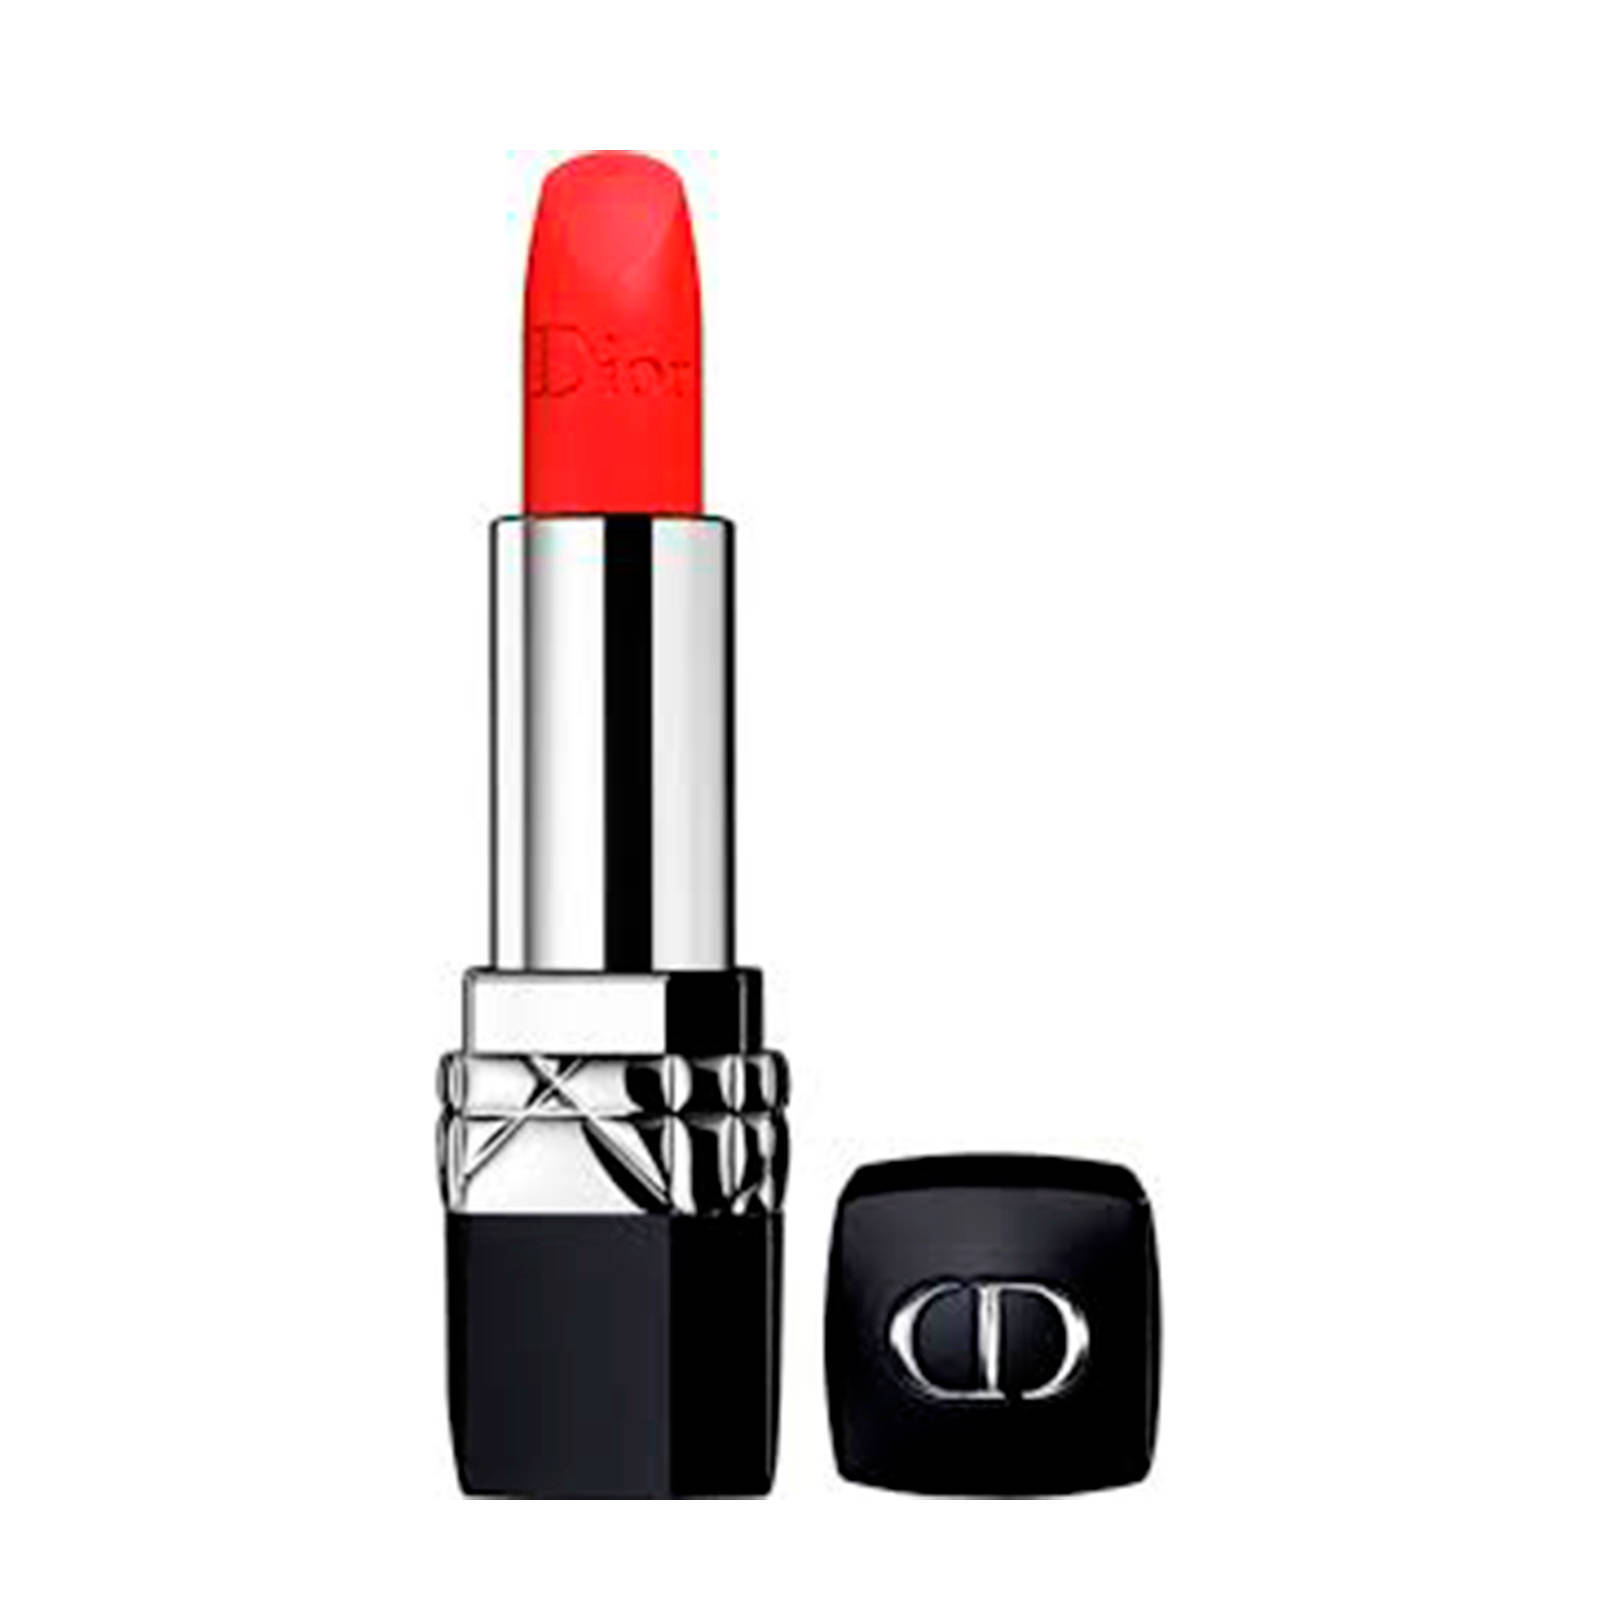 Dior Rouge Dior Couture Colour lippenstift - 634 Strong Matte | wehkamp